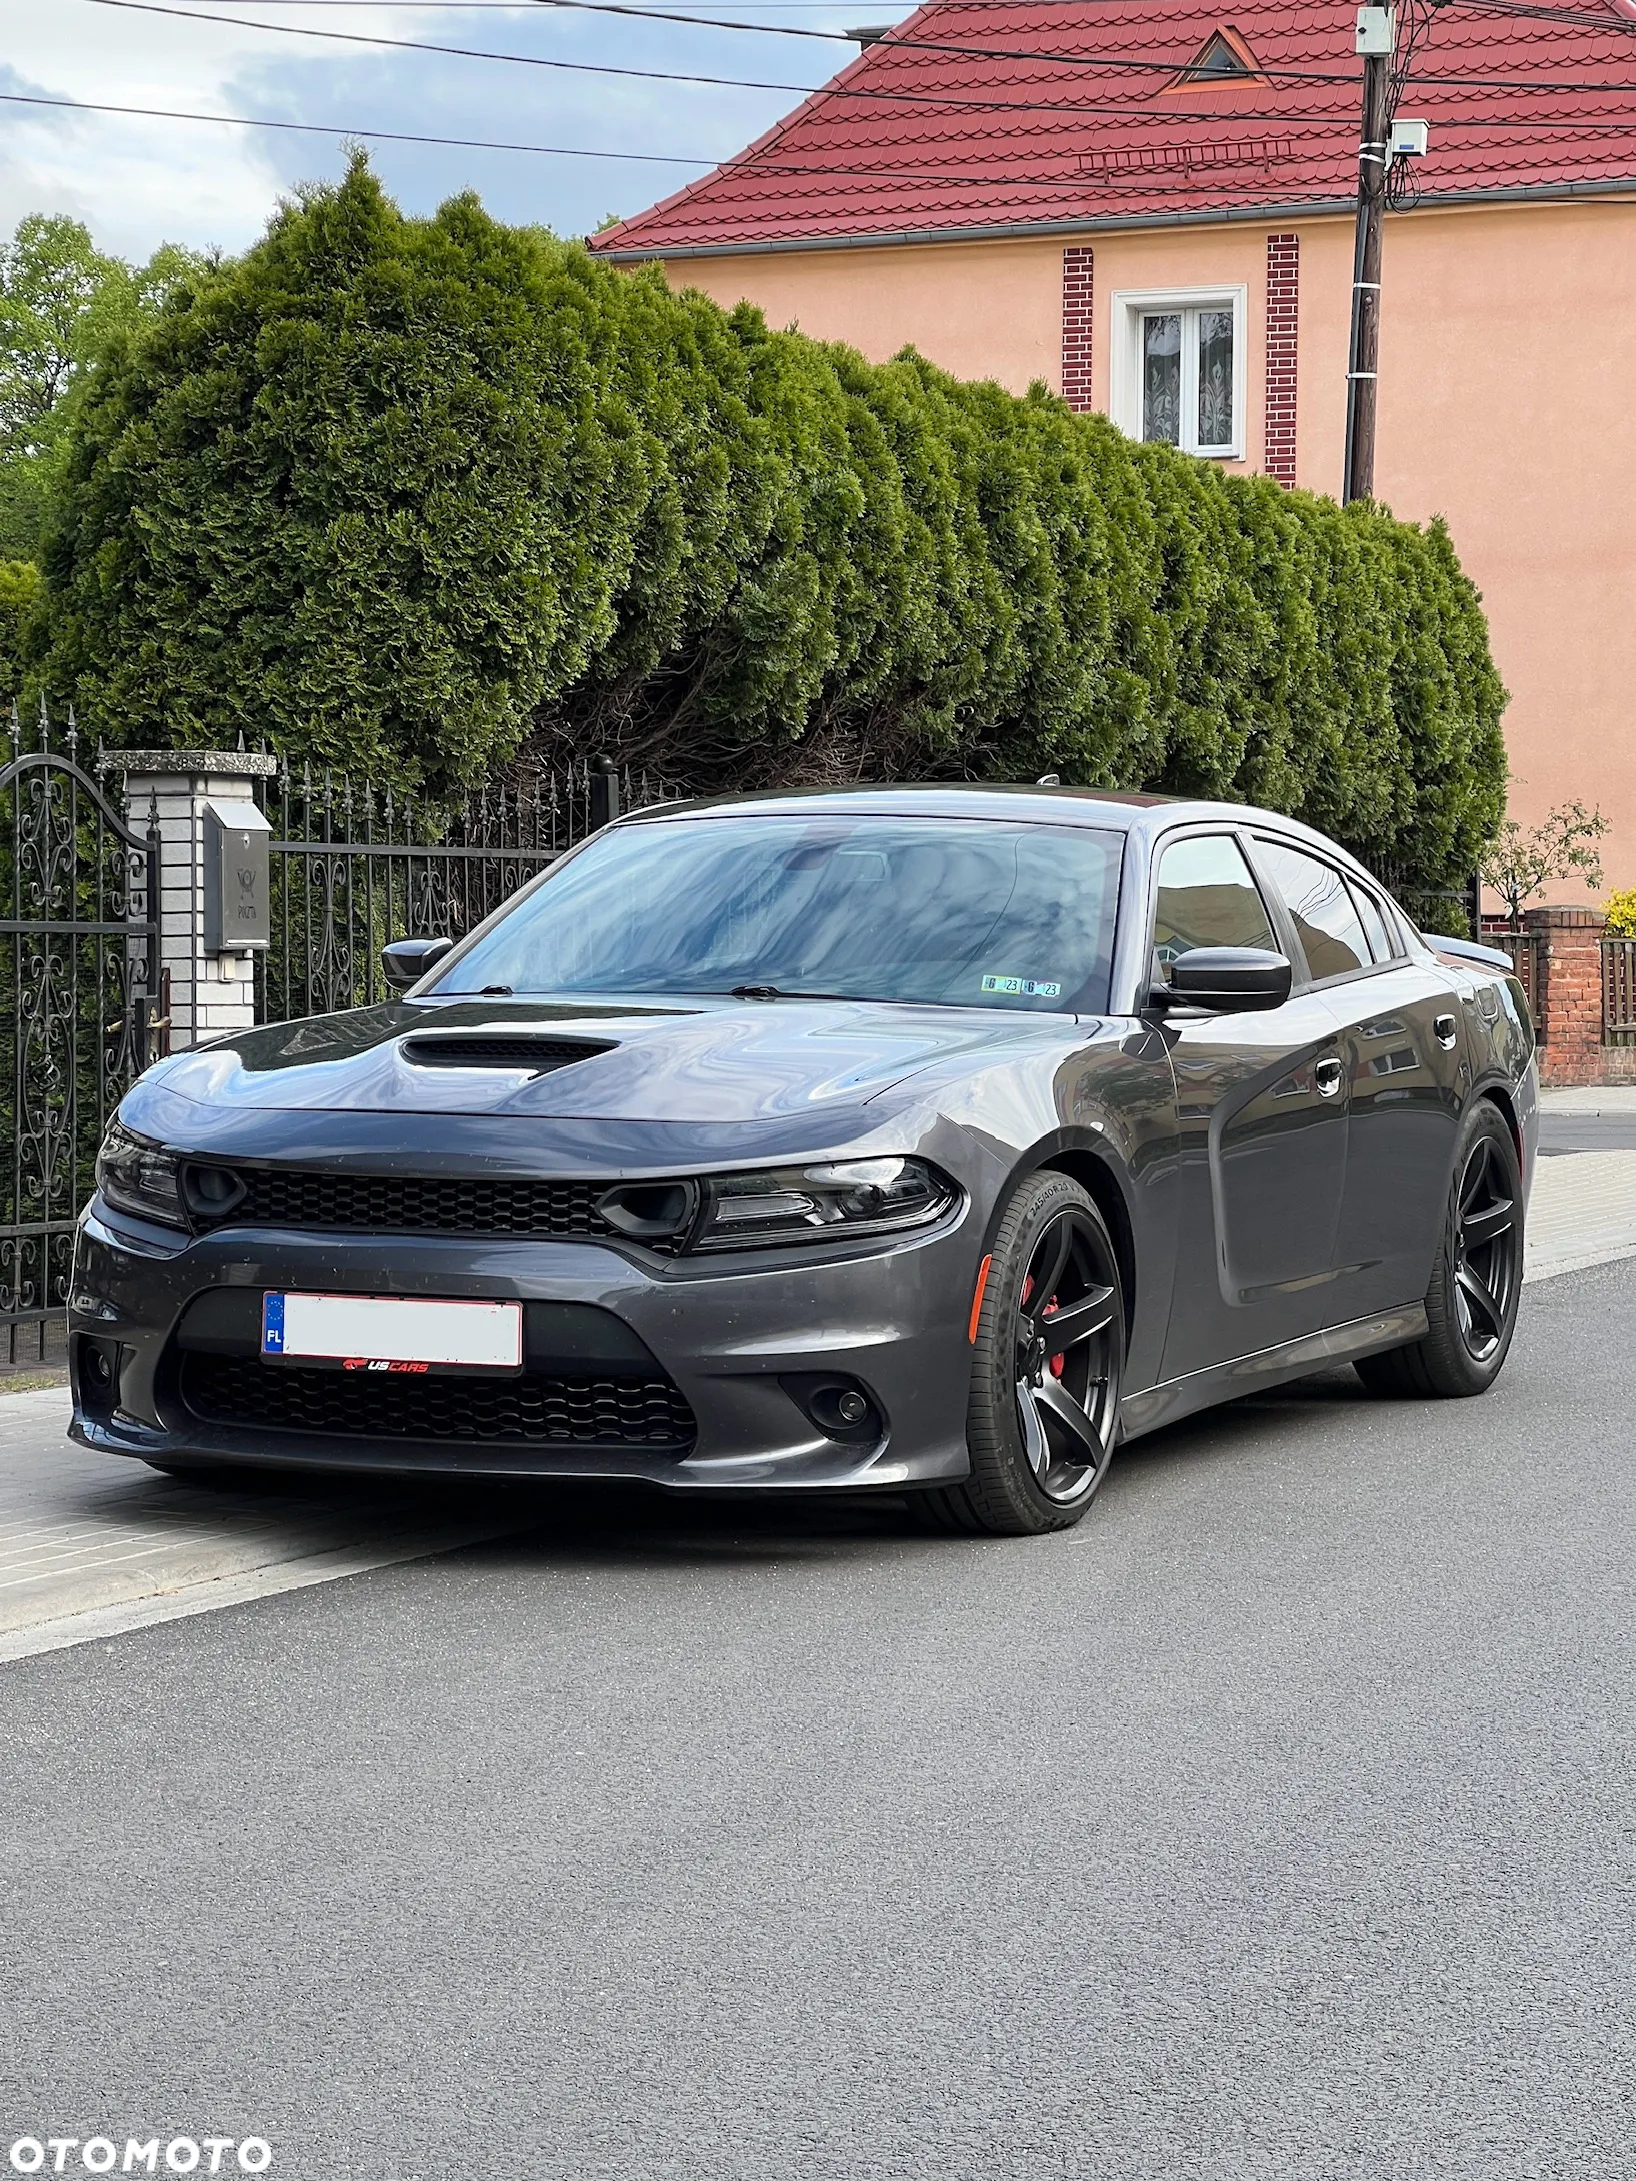 Dodge Charger 6.4 Scat Pack - 3